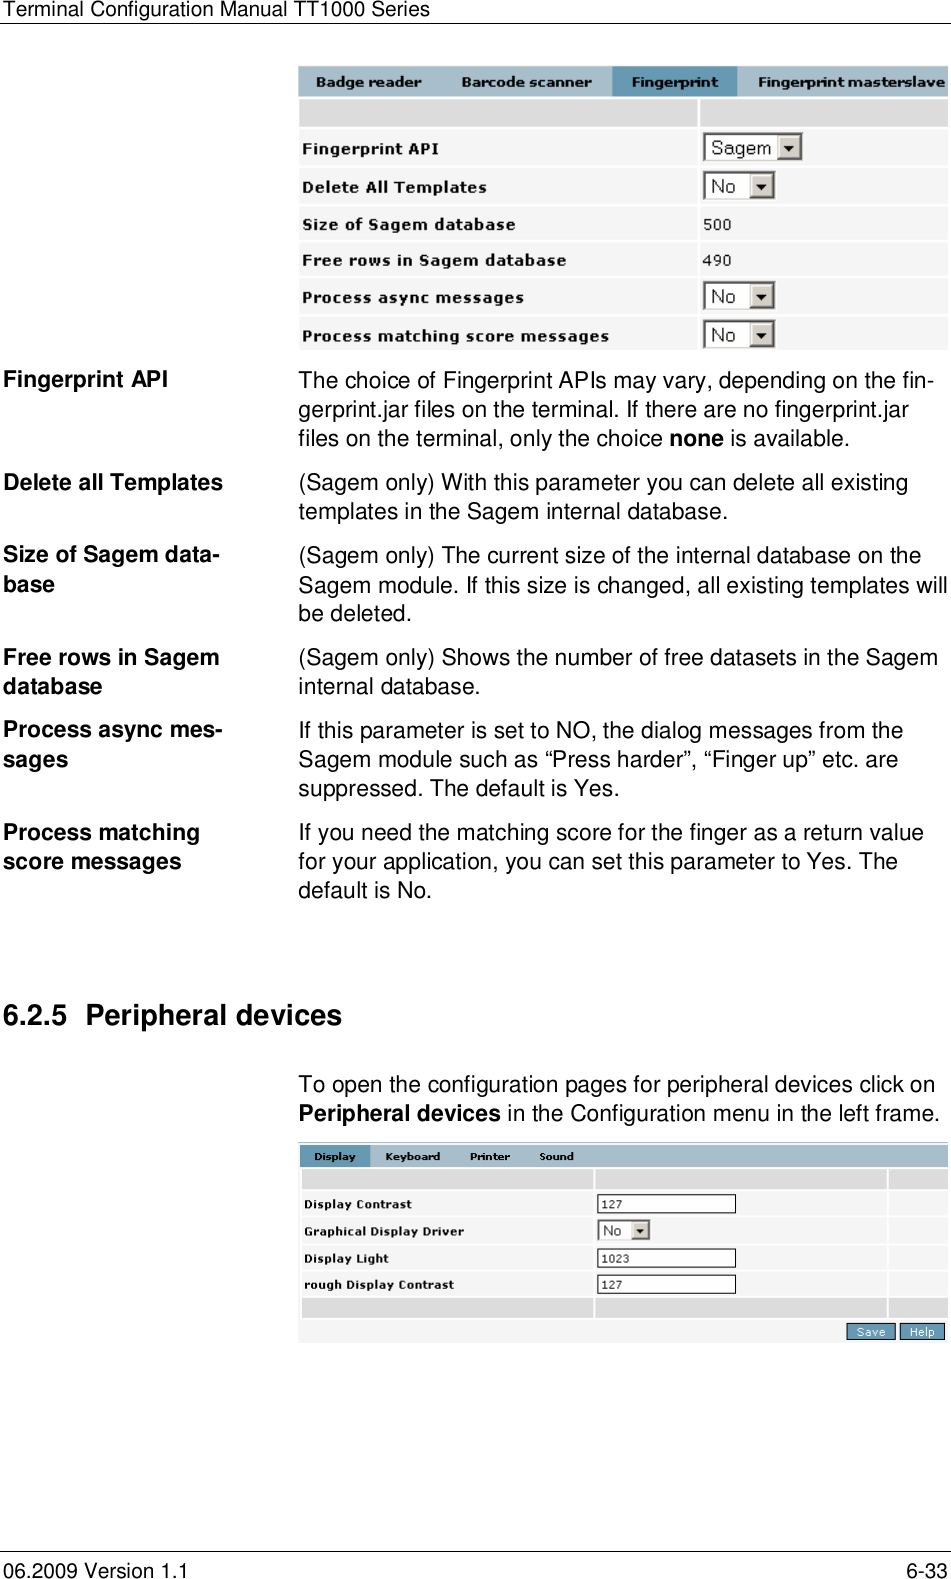 Terminal Configuration Manual TT1000 Series06.2009 Version 1.1 6-33Fingerprint API The choice of Fingerprint APIs may vary, depending on the fin-gerprint.jar files on the terminal. If there are no fingerprint.jarfiles on the terminal, only the choice none is available.Delete all Templates (Sagem only) With this parameter you can delete all existingtemplates in the Sagem internal database.Size of Sagem data-base (Sagem only) The current size of the internal database on theSagem module. If this size is changed, all existing templates willbe deleted.Free rows in Sagemdatabase (Sagem only) Shows the number of free datasets in the Sageminternal database.Process async mes-sages If this parameter is set to NO, the dialog messages from theSagem module such as “Press harder”, “Finger up” etc. aresuppressed. The default is Yes.Process matchingscore messages If you need the matching score for the finger as a return valuefor your application, you can set this parameter to Yes. Thedefault is No.6.2.5  Peripheral devicesTo open the configuration pages for peripheral devices click onPeripheral devices in the Configuration menu in the left frame.